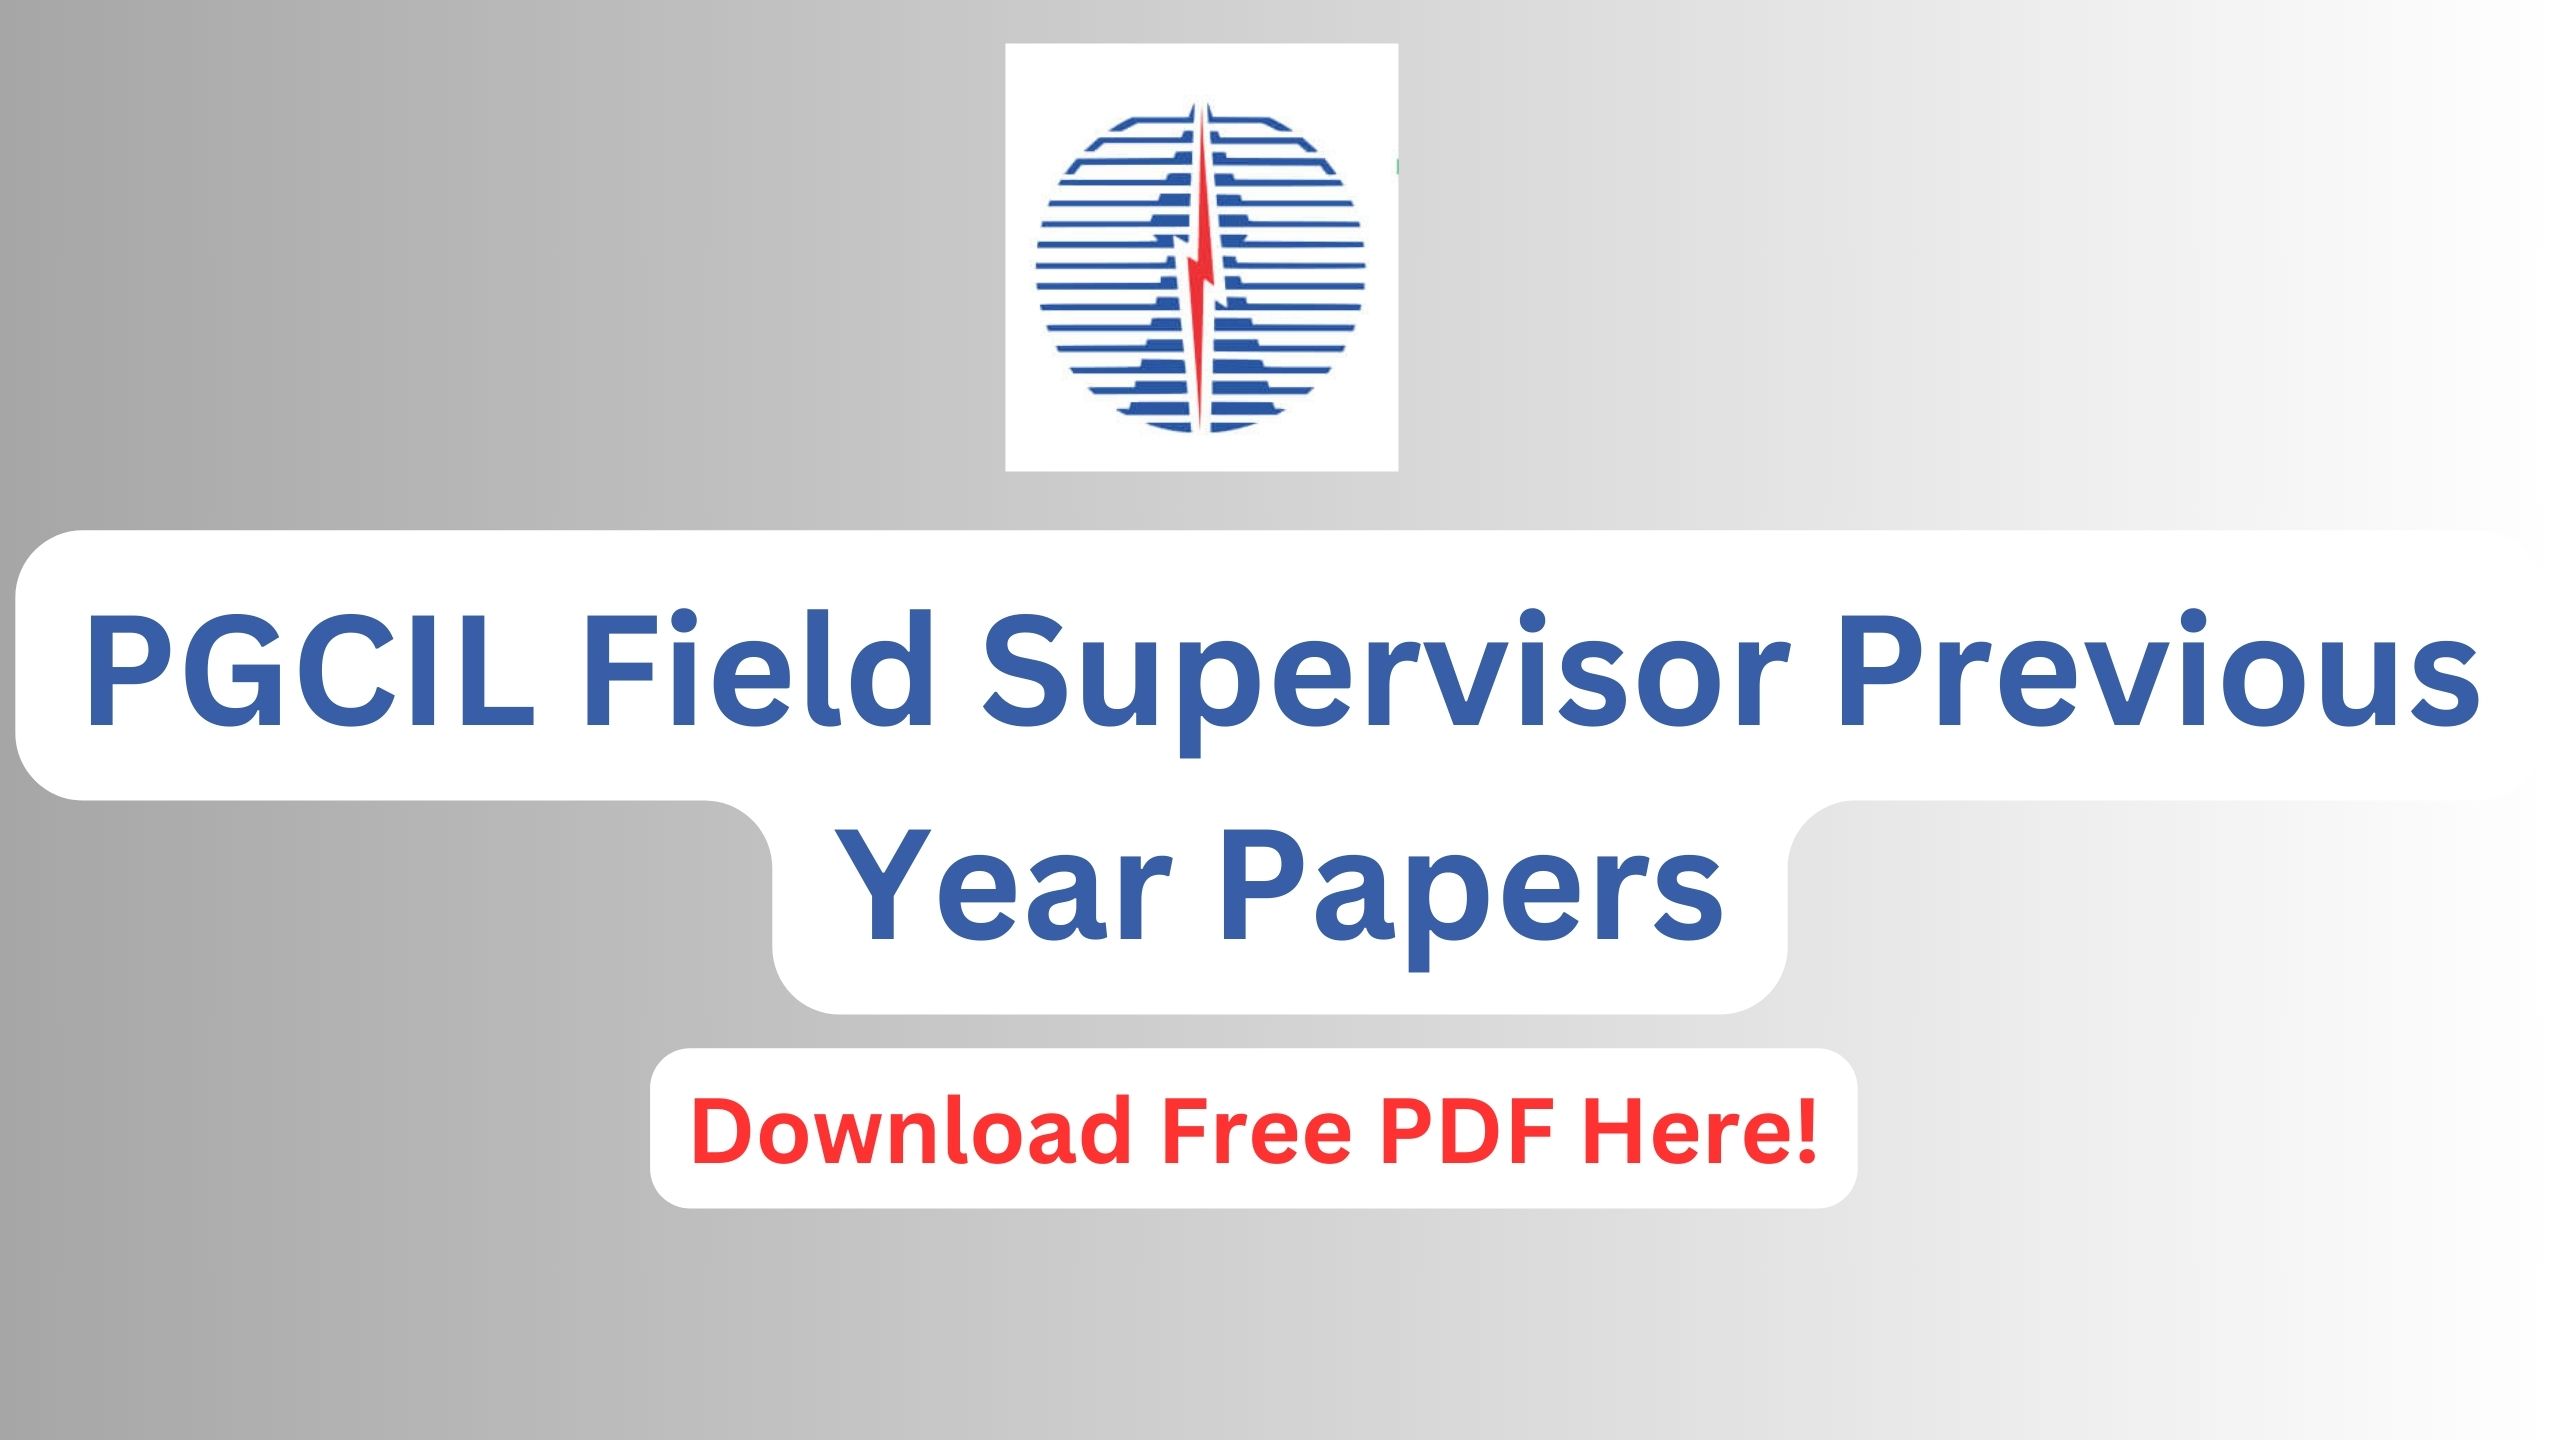 PGCIL Field Supervisor Previous Year Papers